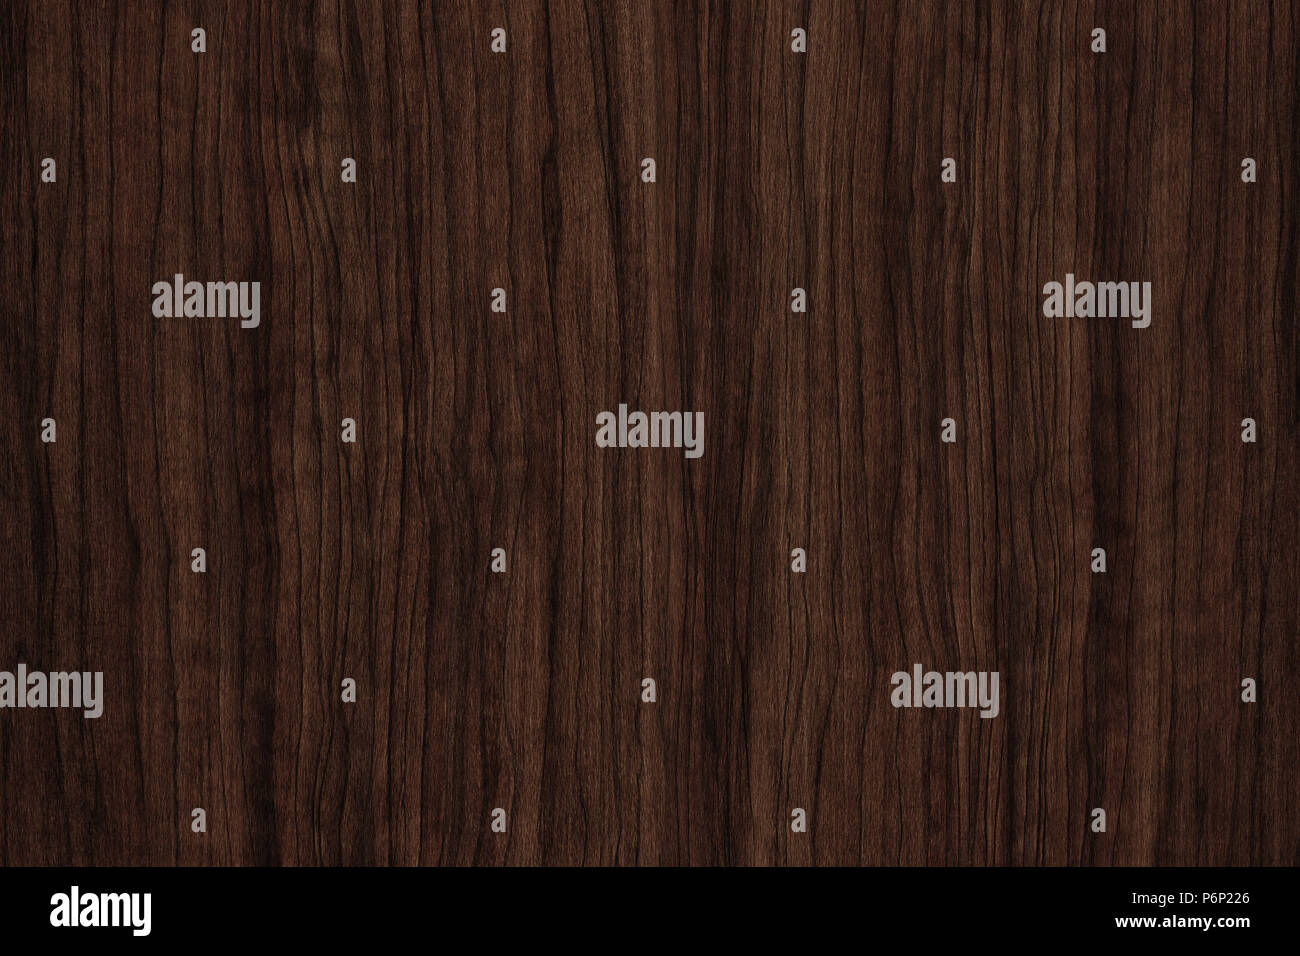 brown grunge wooden texture to use as background, wood texture with natural dark pattern Stock Photo